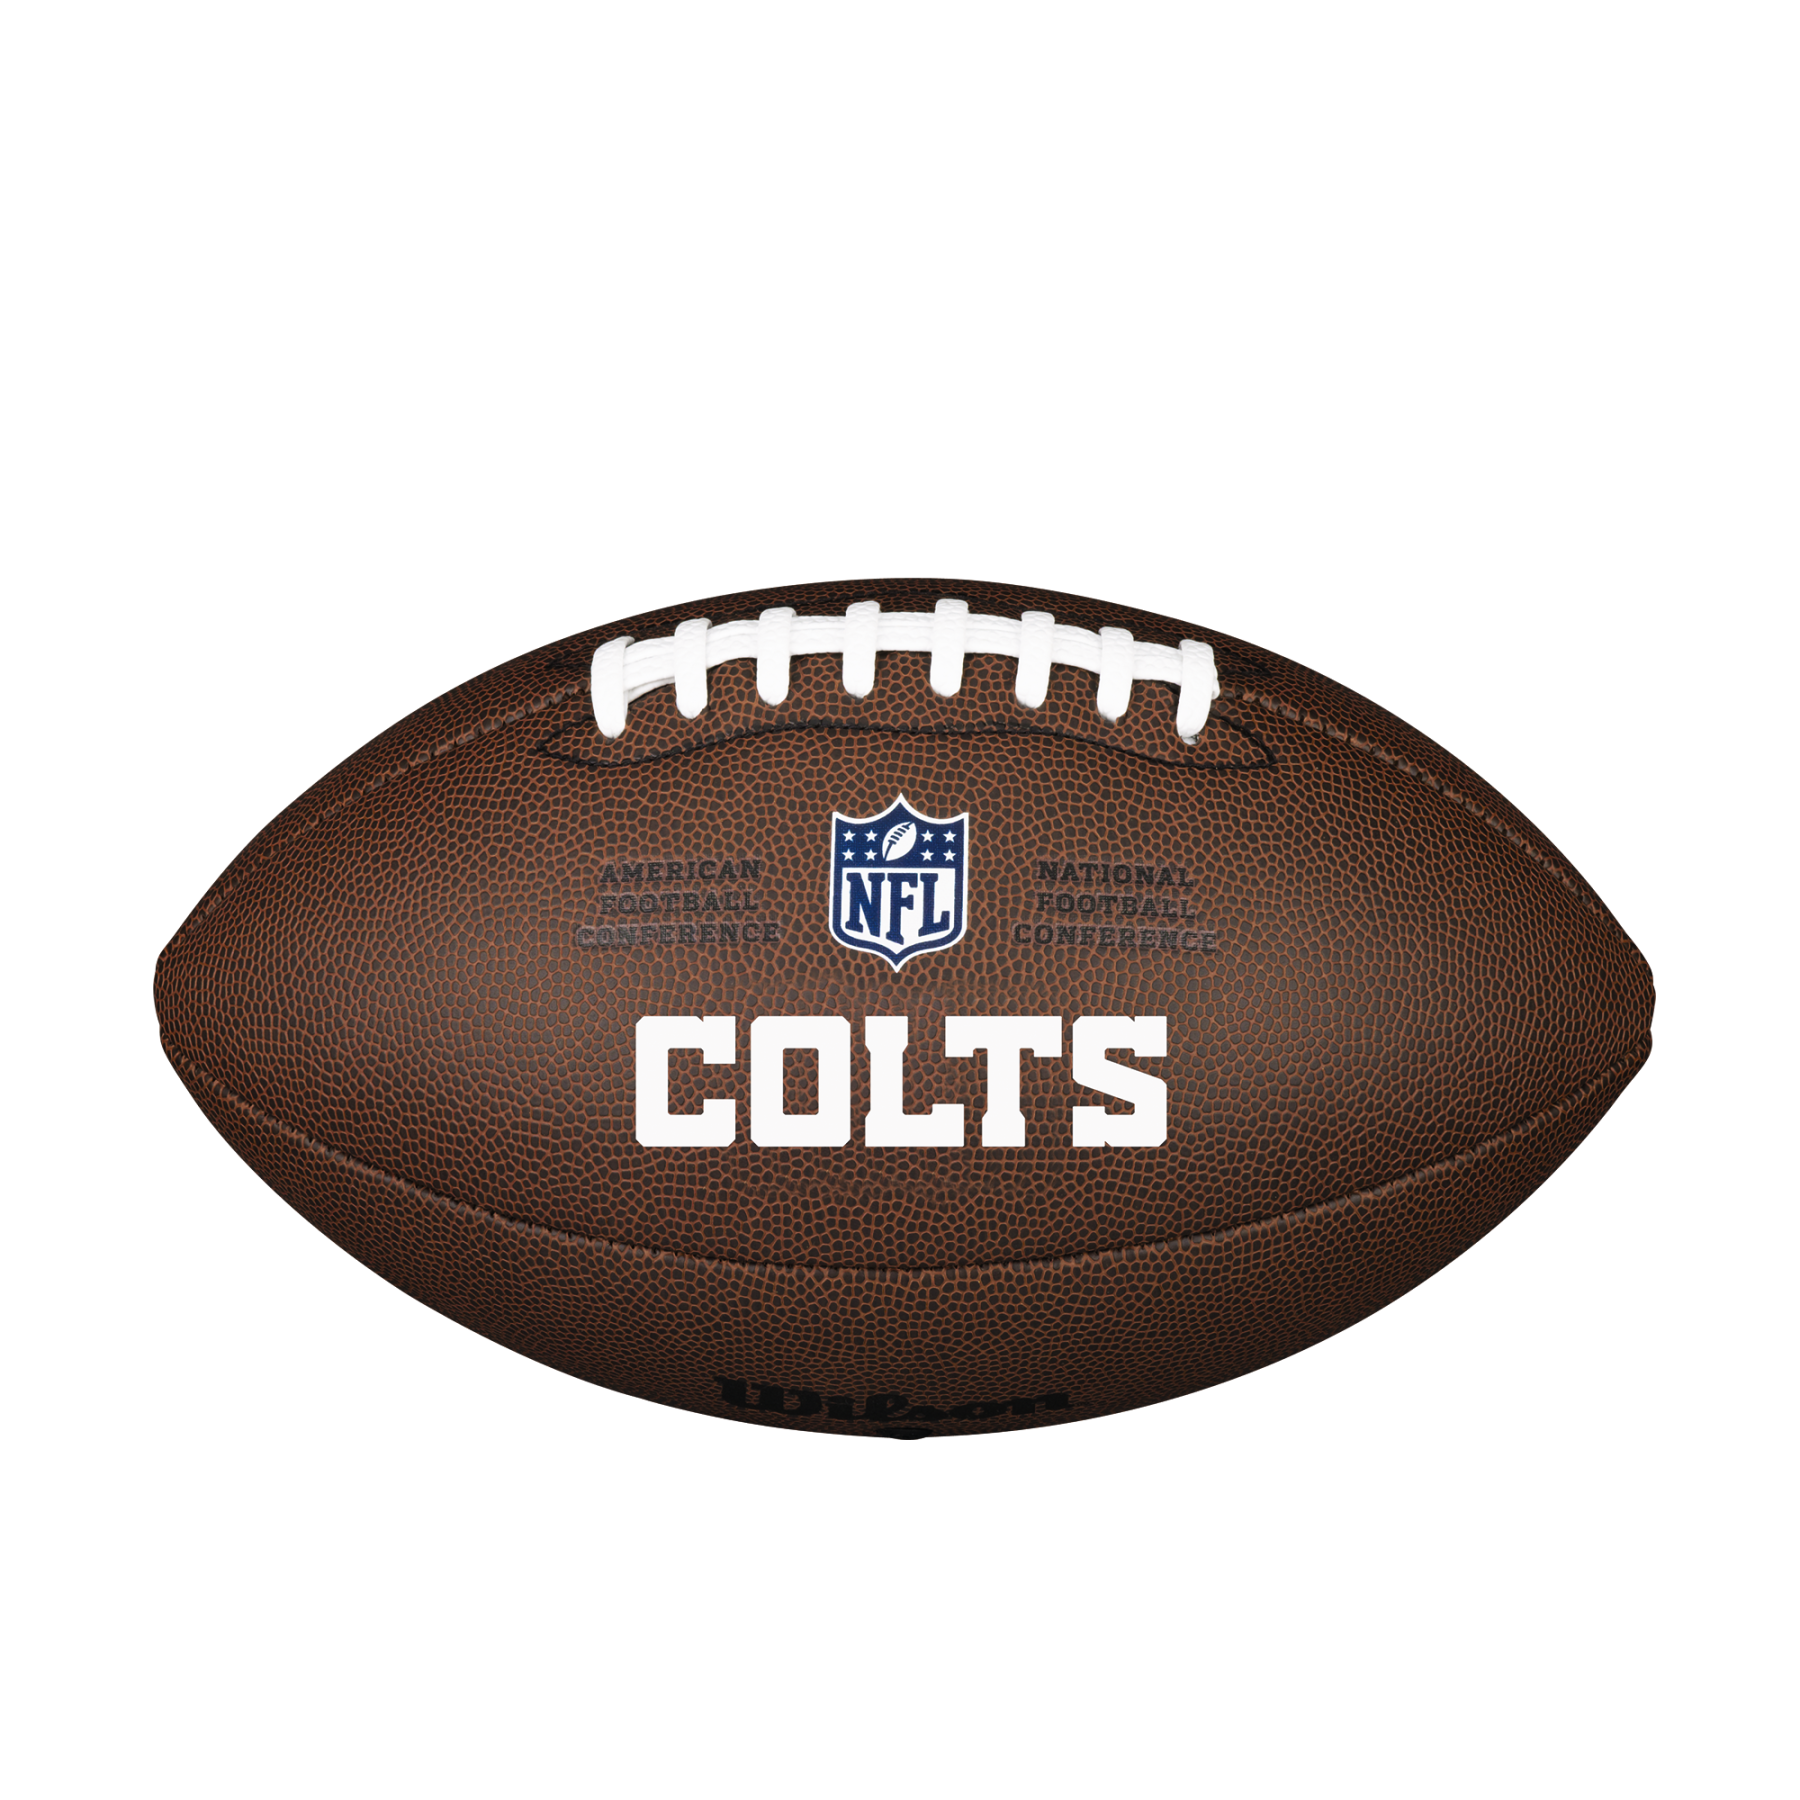 American Football Wilson Colts NFL Licensed